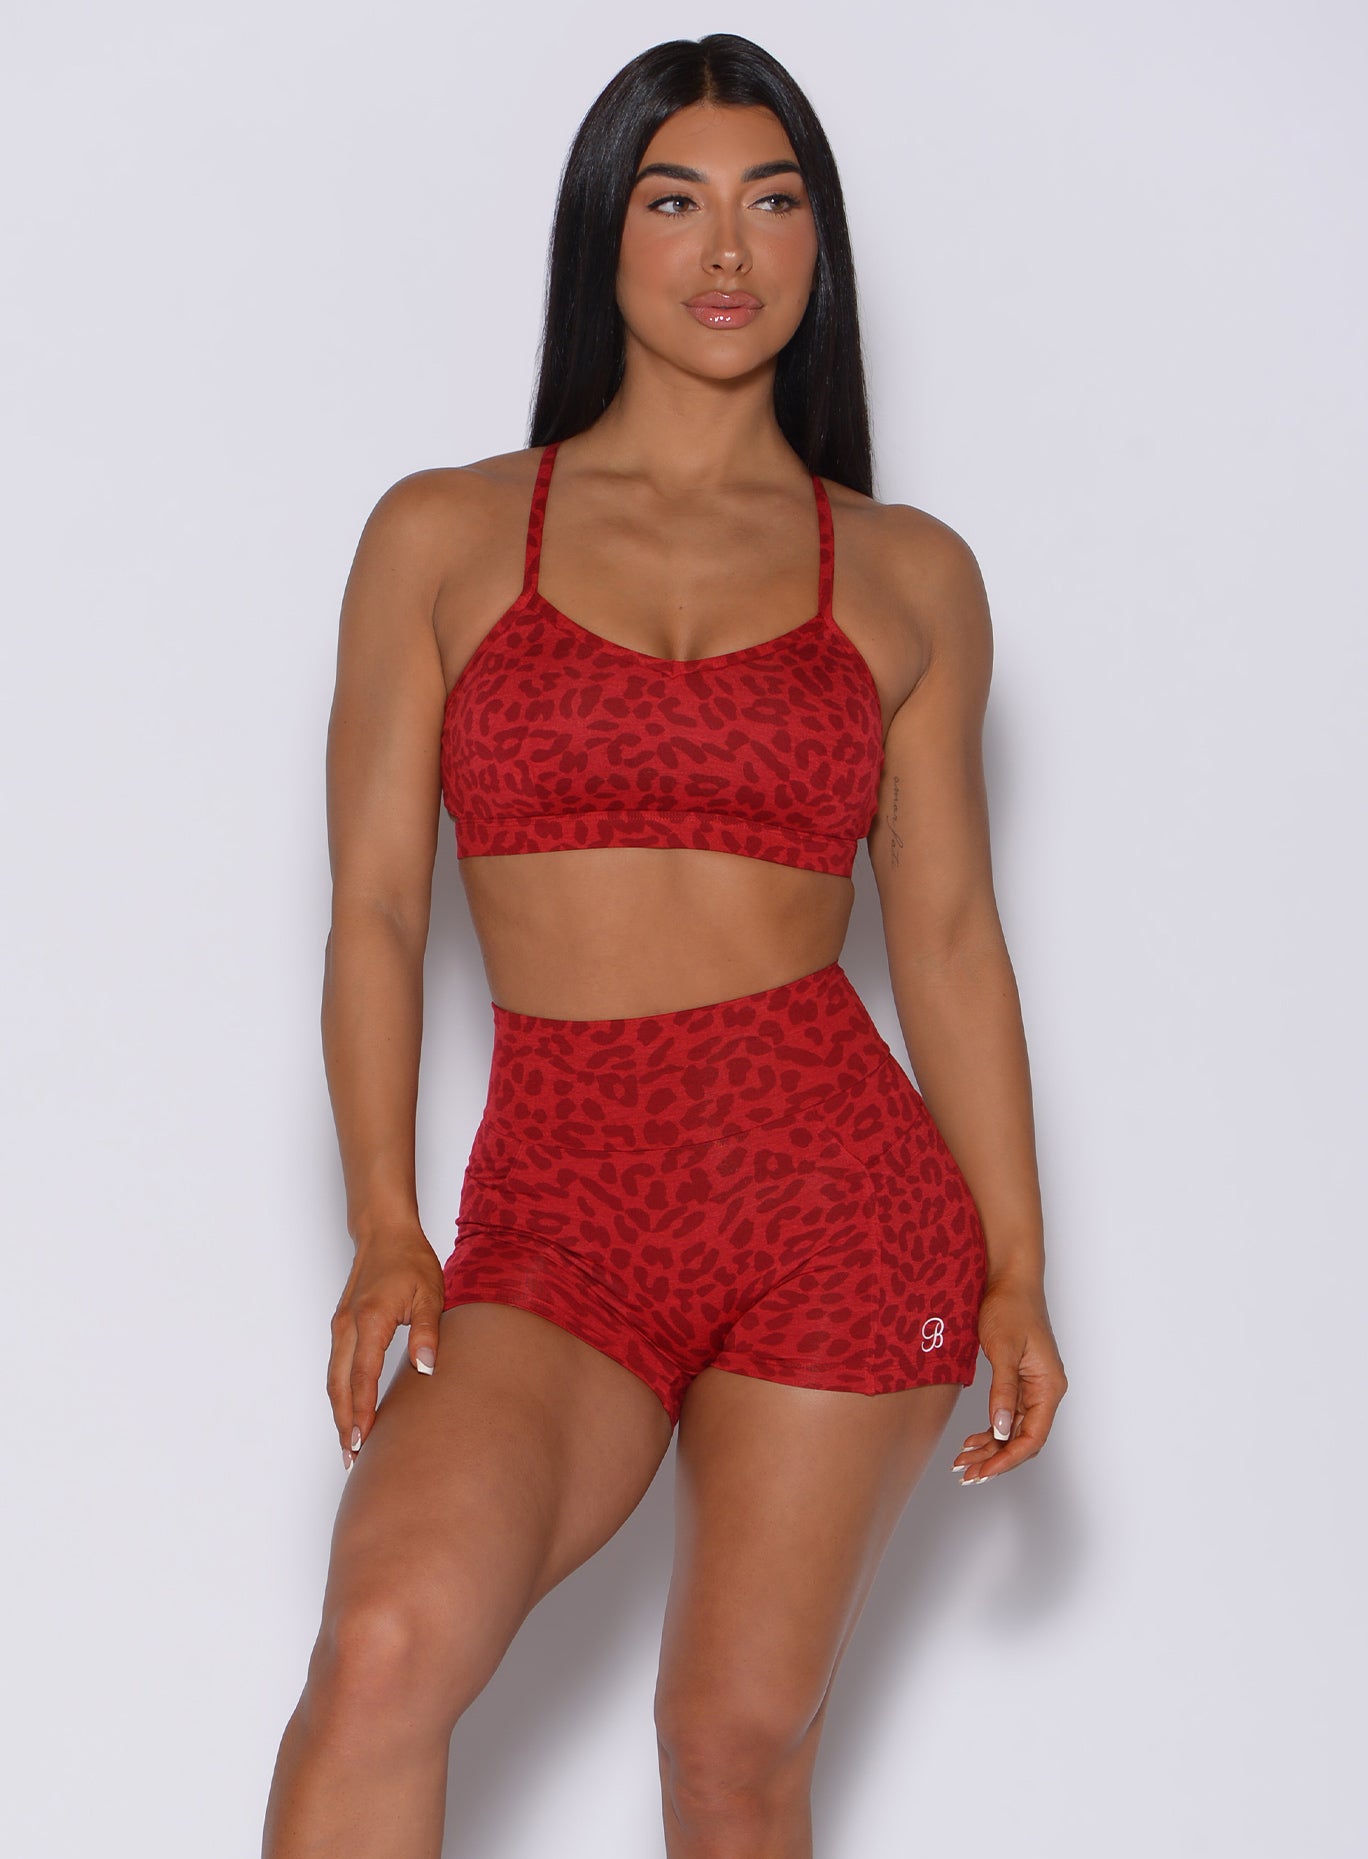 Front profile view of a model wearing our curves shorts in red cheetah color along with a matching bra